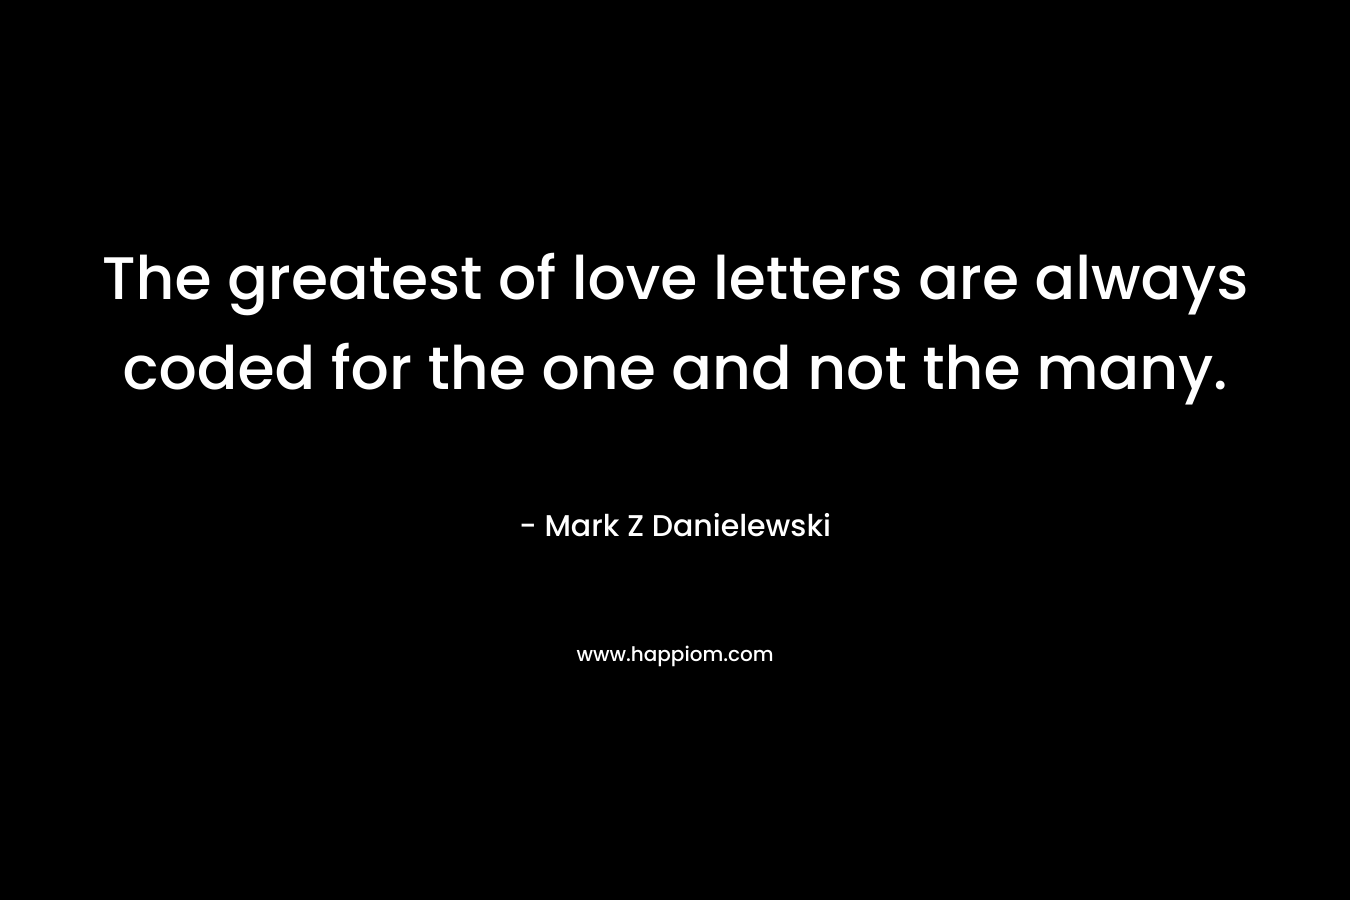 The greatest of love letters are always coded for the one and not the many.